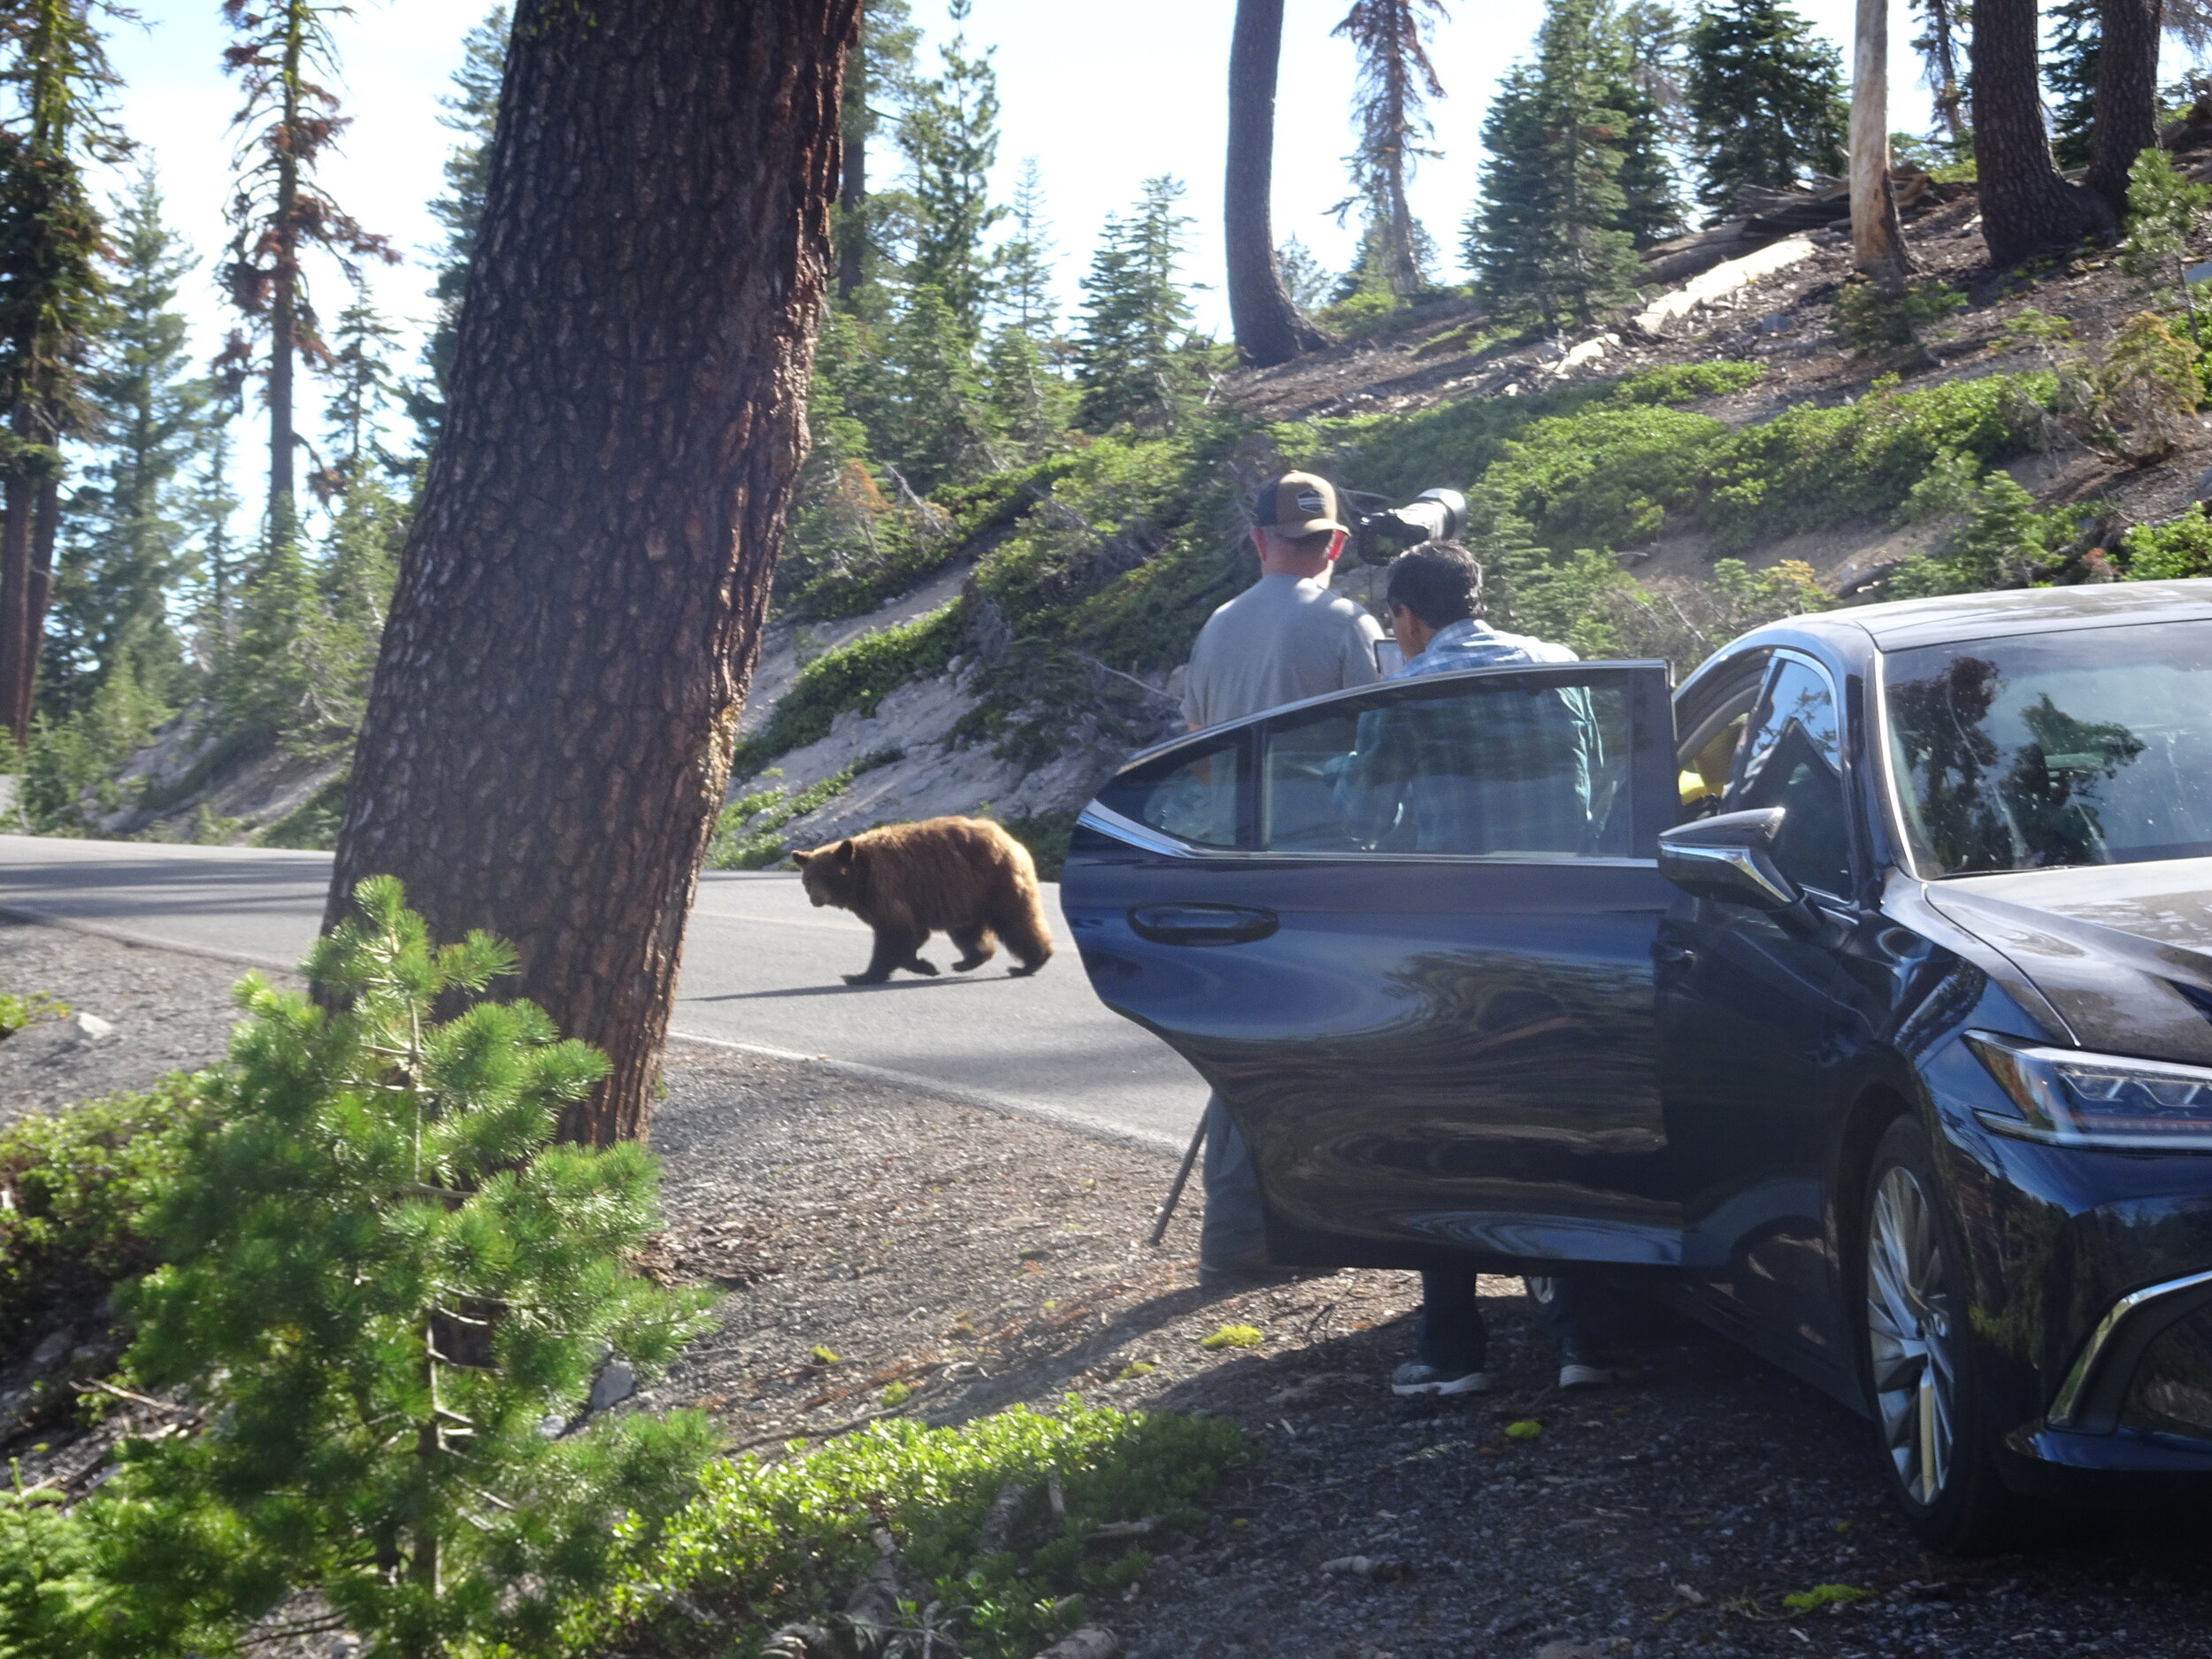 Photo 9 - Bear crossing the road, not too far away from us and the 3 other people (we let them stand closer,) but also fully aware of us and not too concerned.  Photo by Karen Boudreaux, 6/5/21